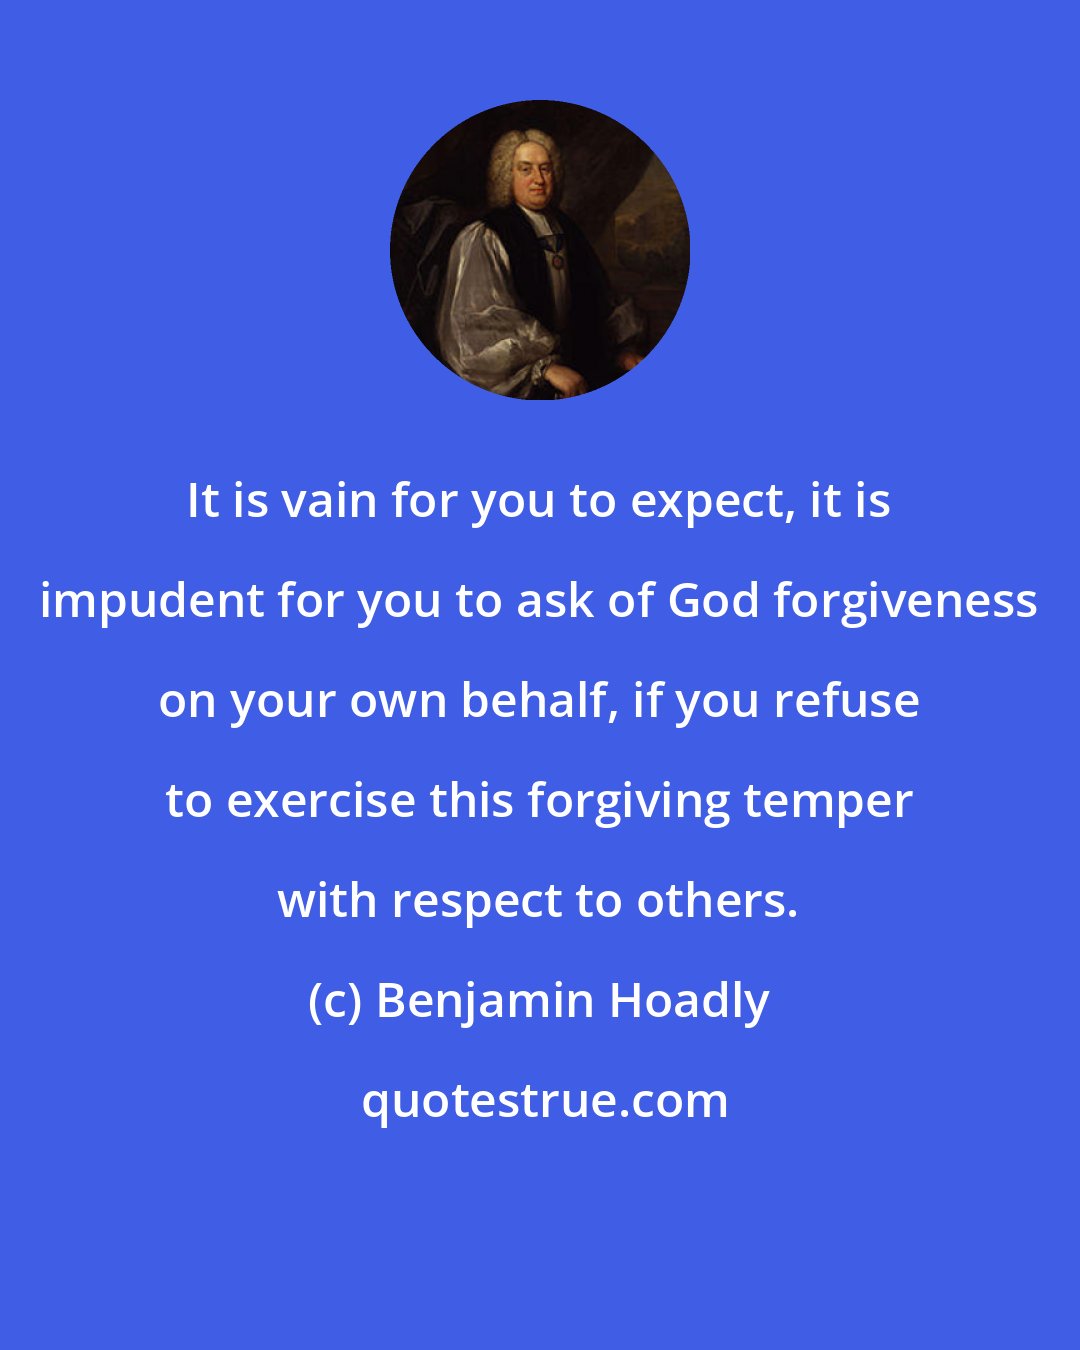 Benjamin Hoadly: It is vain for you to expect, it is impudent for you to ask of God forgiveness on your own behalf, if you refuse to exercise this forgiving temper with respect to others.